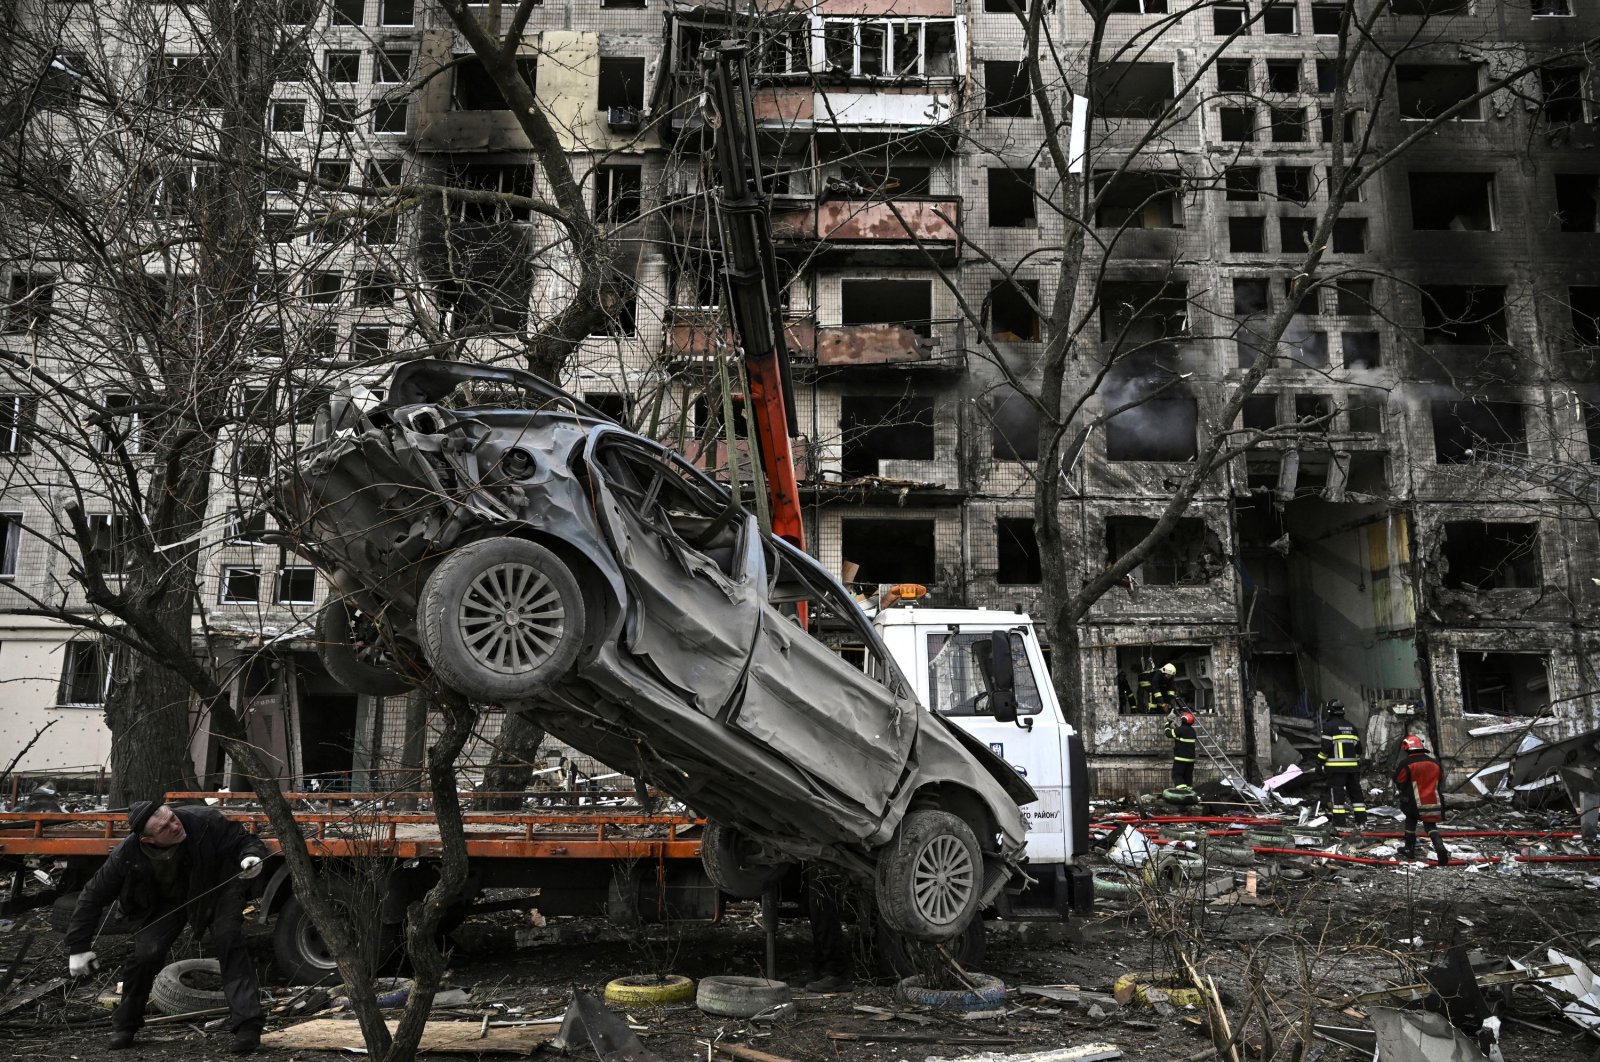 A crane removes a ruined car from in front of a destroyed apartment building after it was shelled by Russia, in Kyiv, Ukraine, March 14, 2022. (AFP Photo)